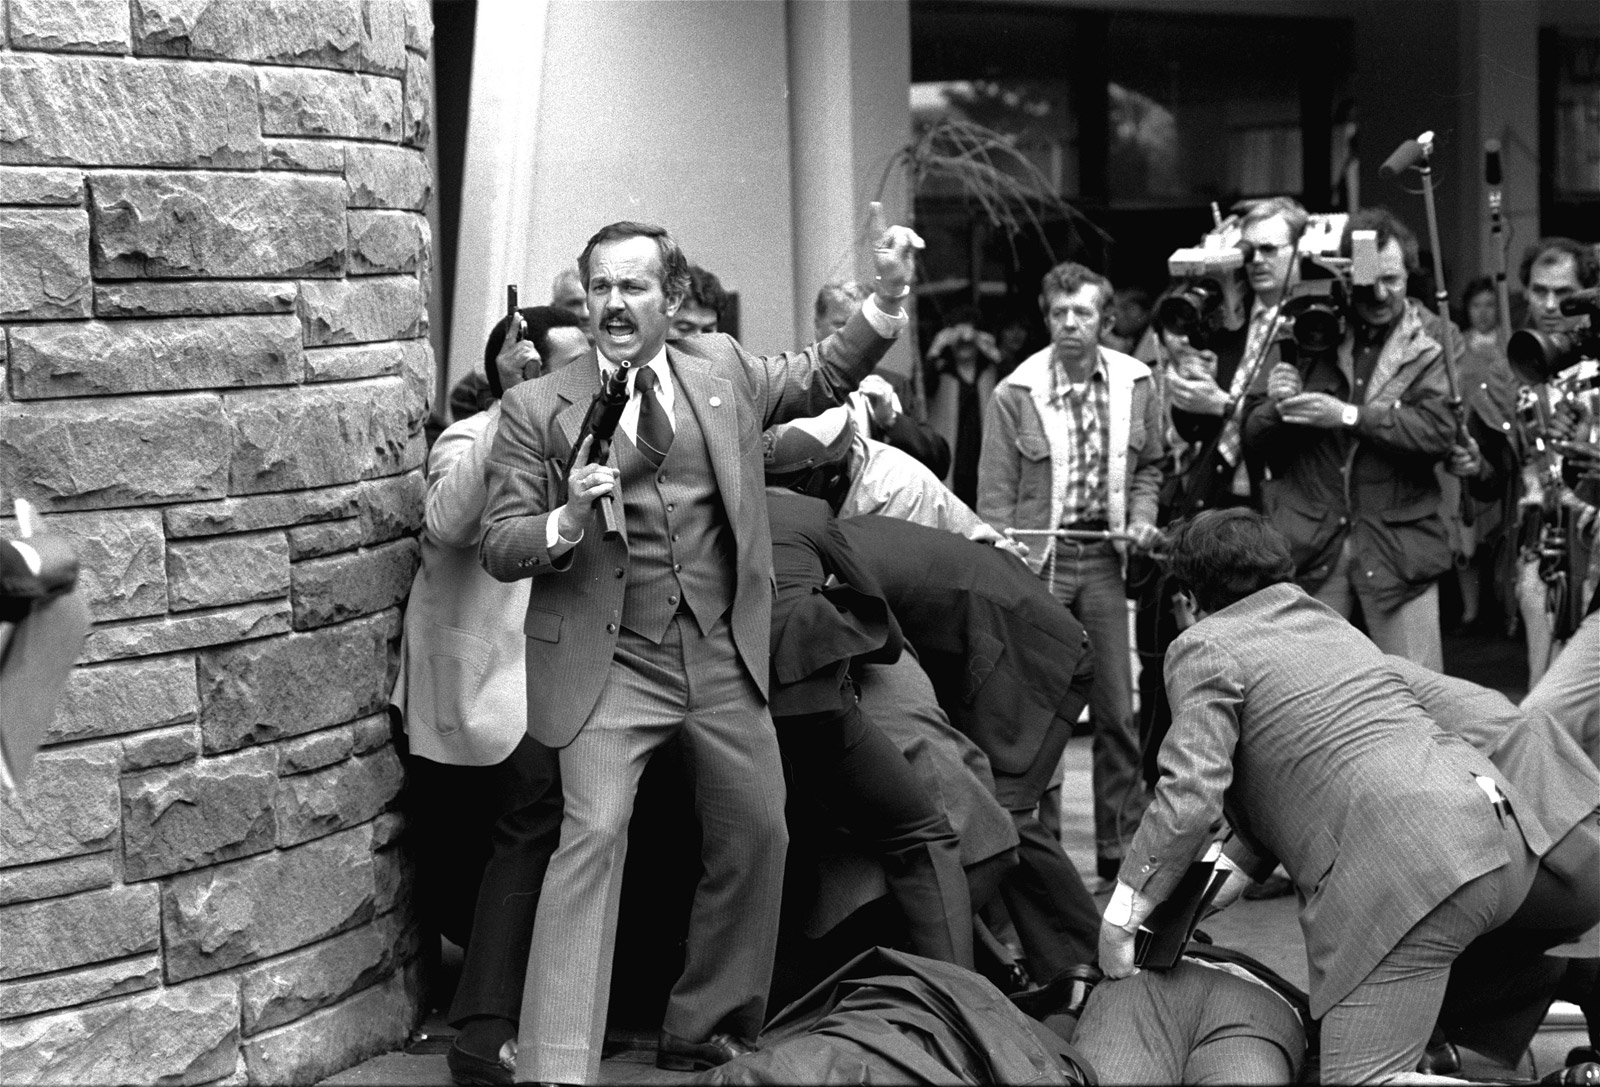 Agents and aides continued to wrestle with Hinckley and attend to Brady and the other victims as bystanders and press looked on.